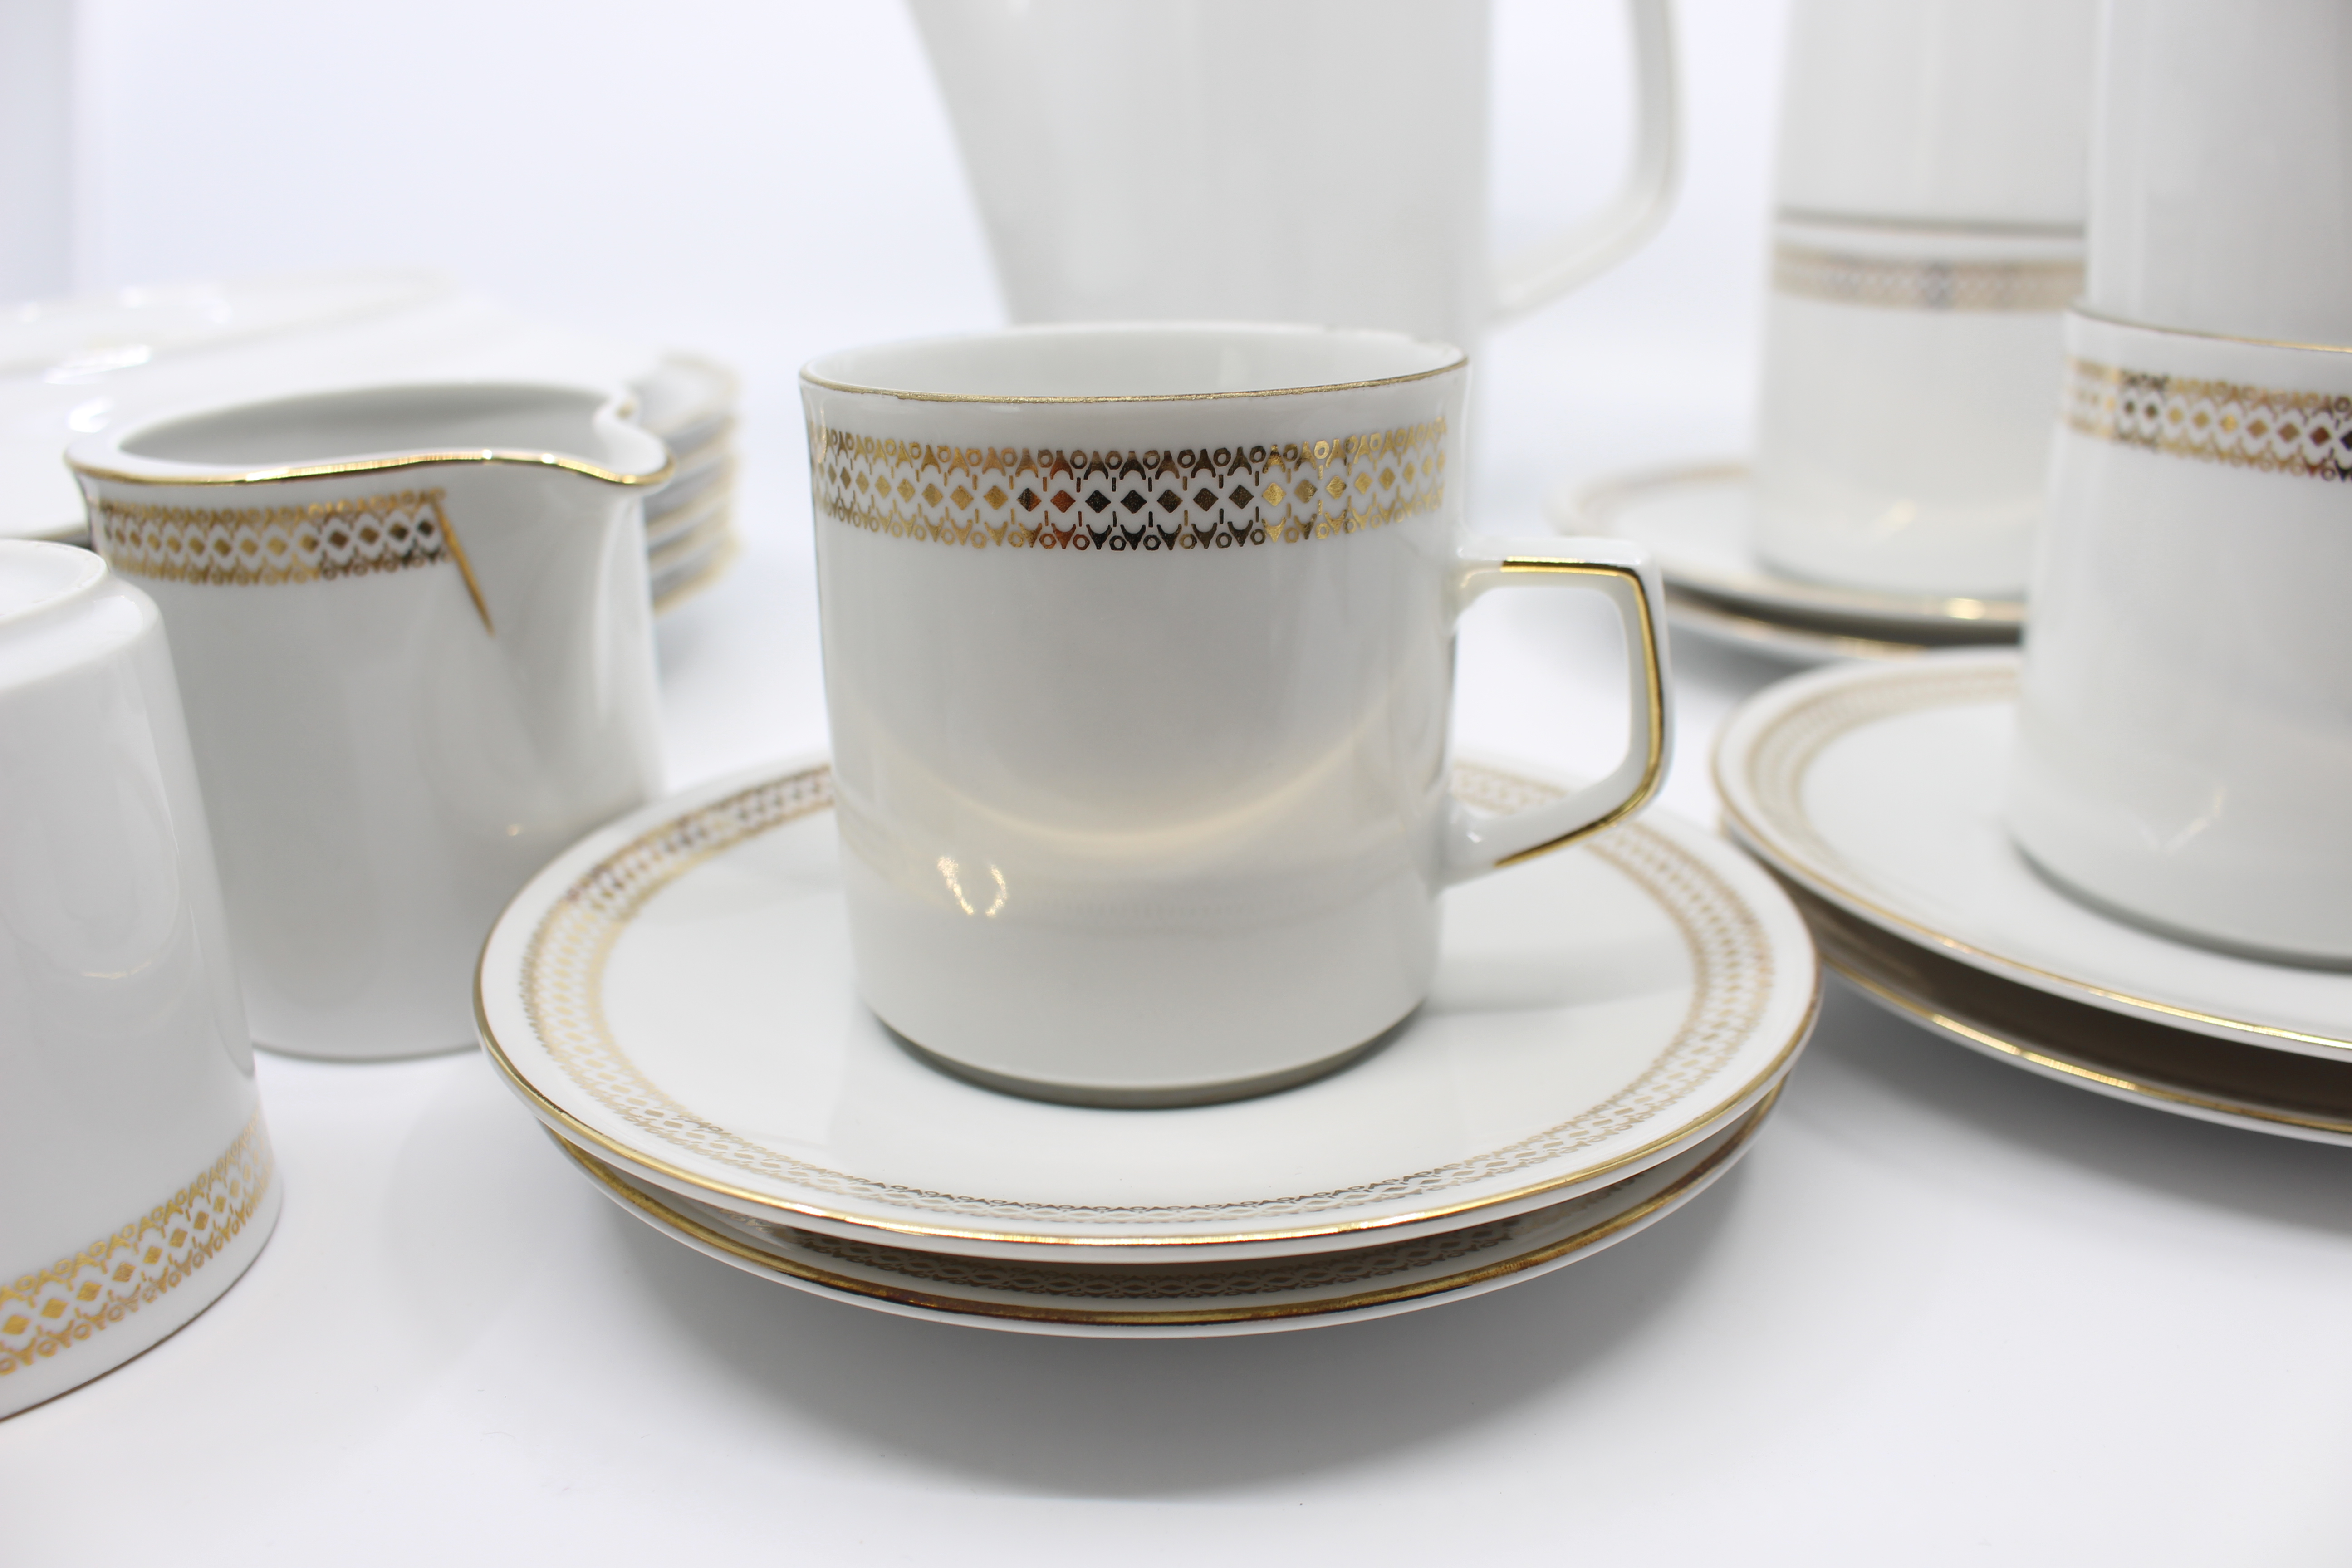 23 Piece Winterling Bavaria White & Gold Porcelain Coffee Service - Image 8 of 10